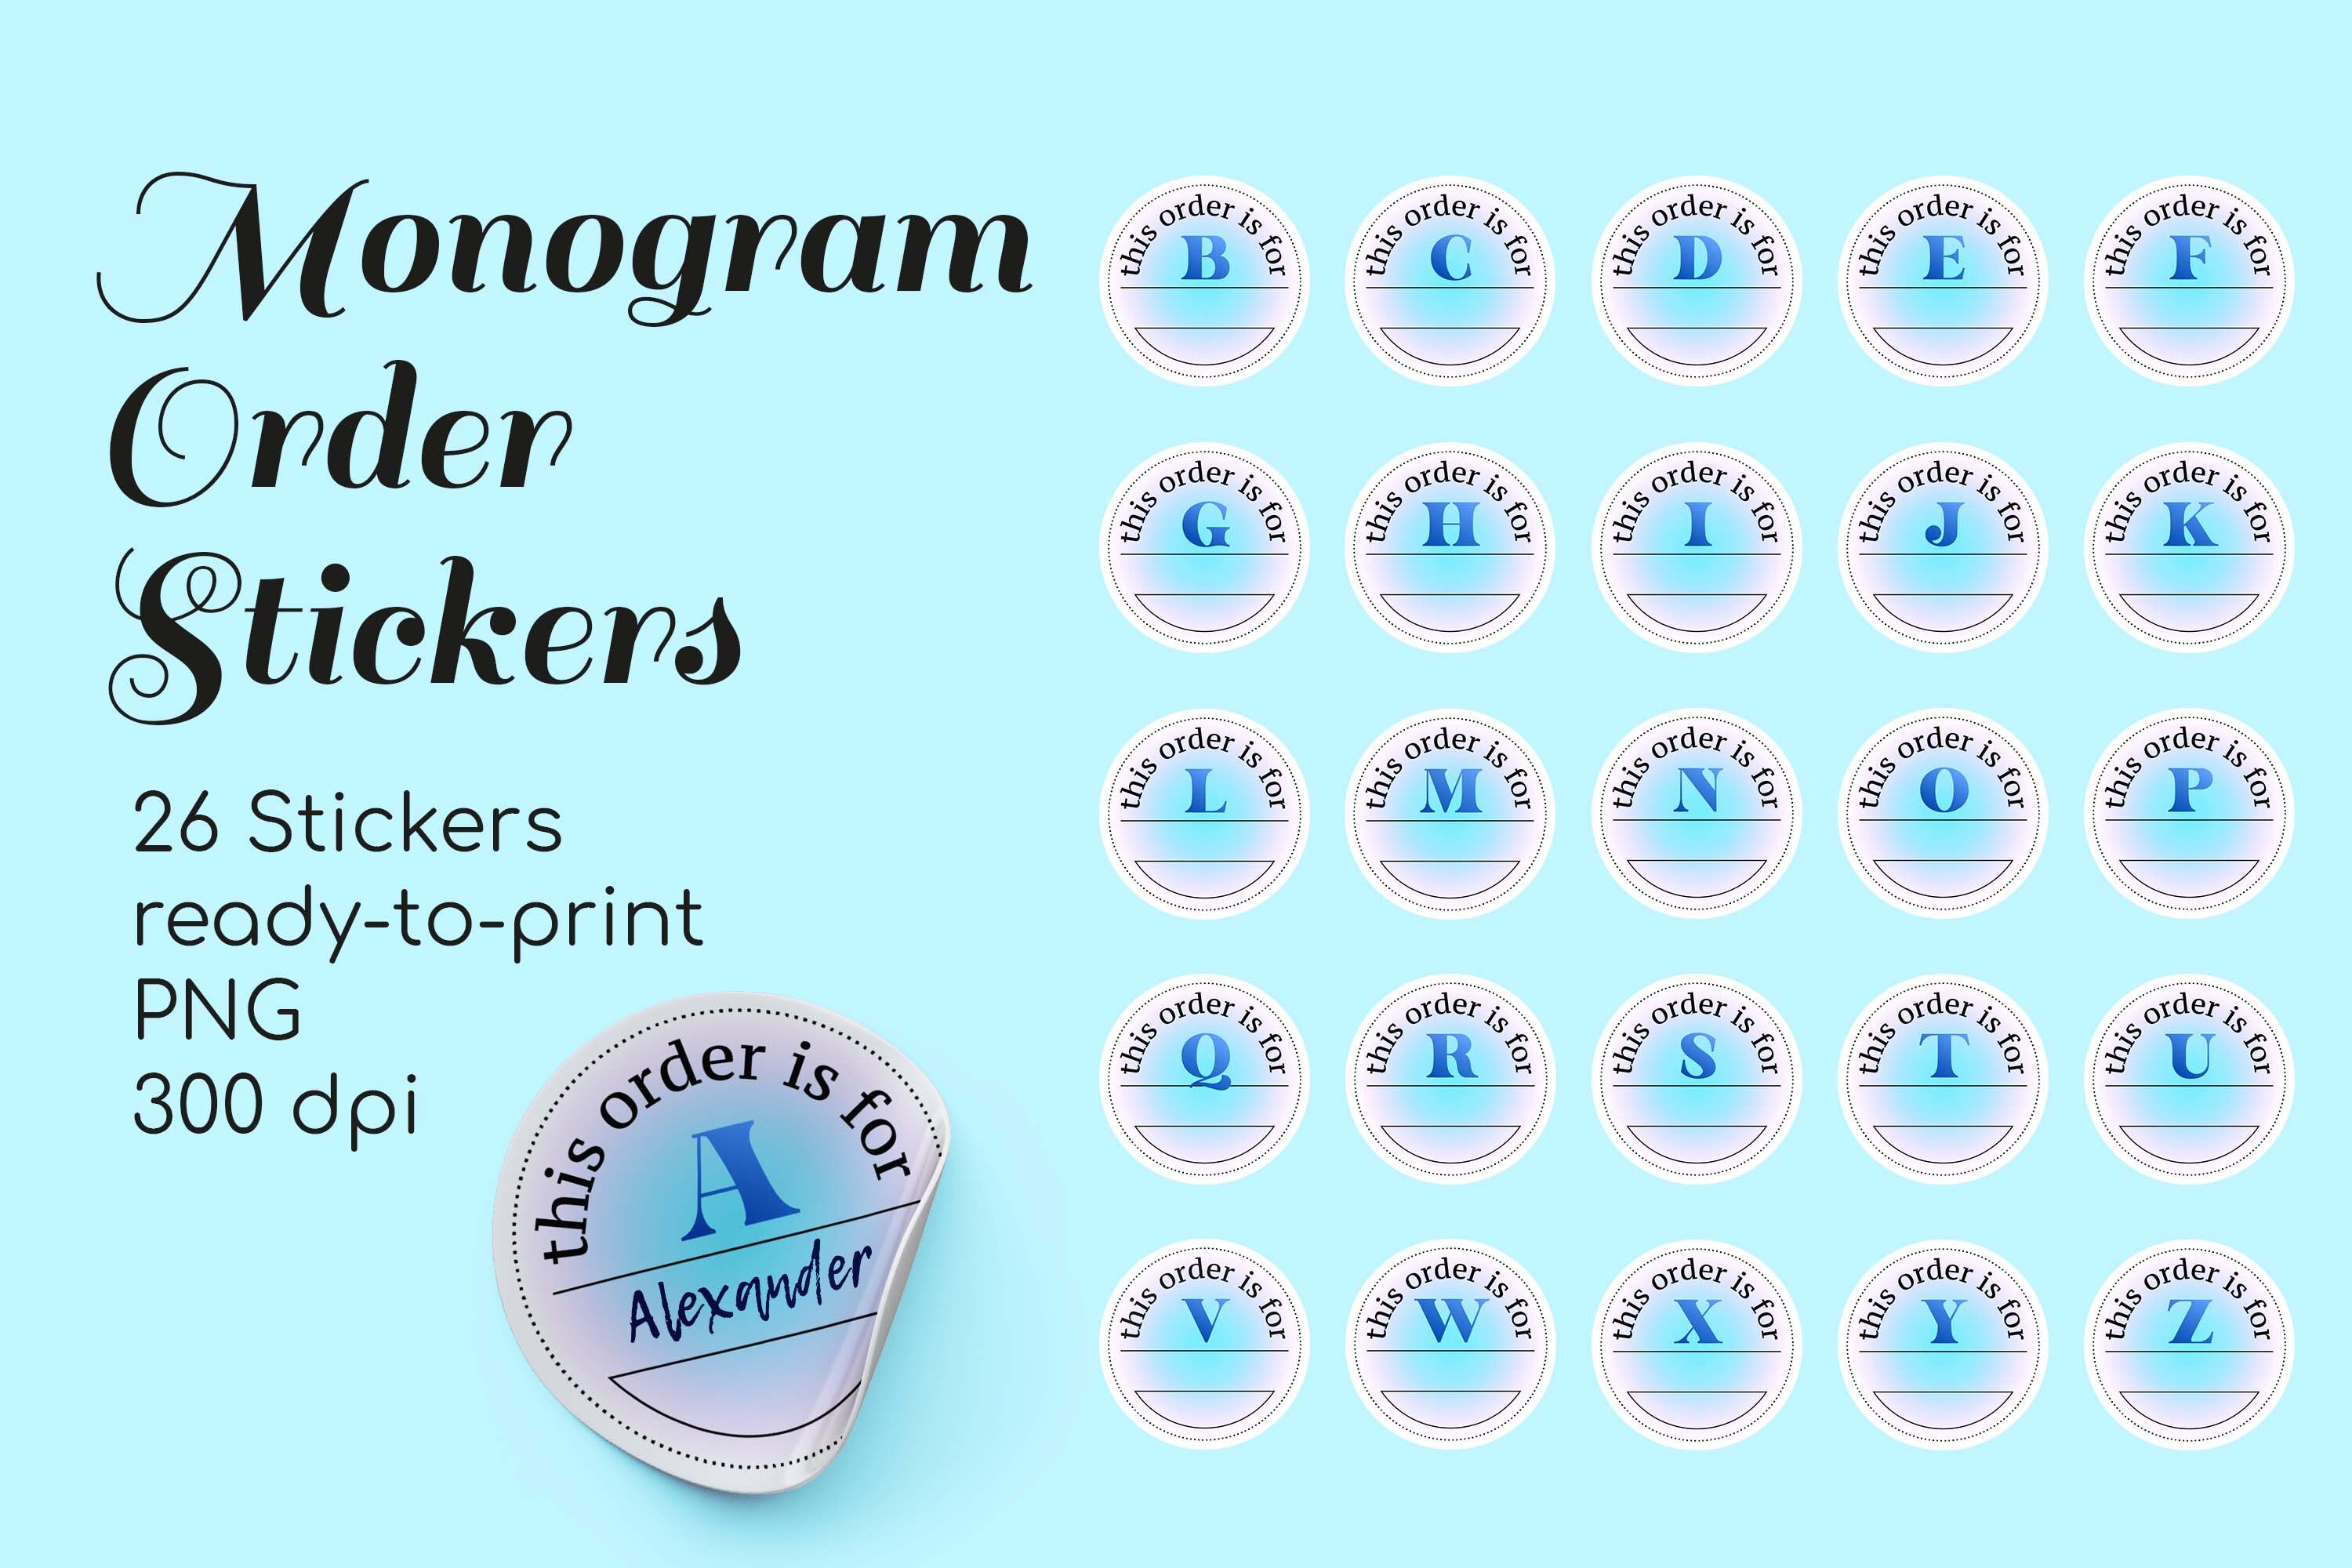 Monogram Order Small Business Stickers Print & Cut Template By Art is mrrr